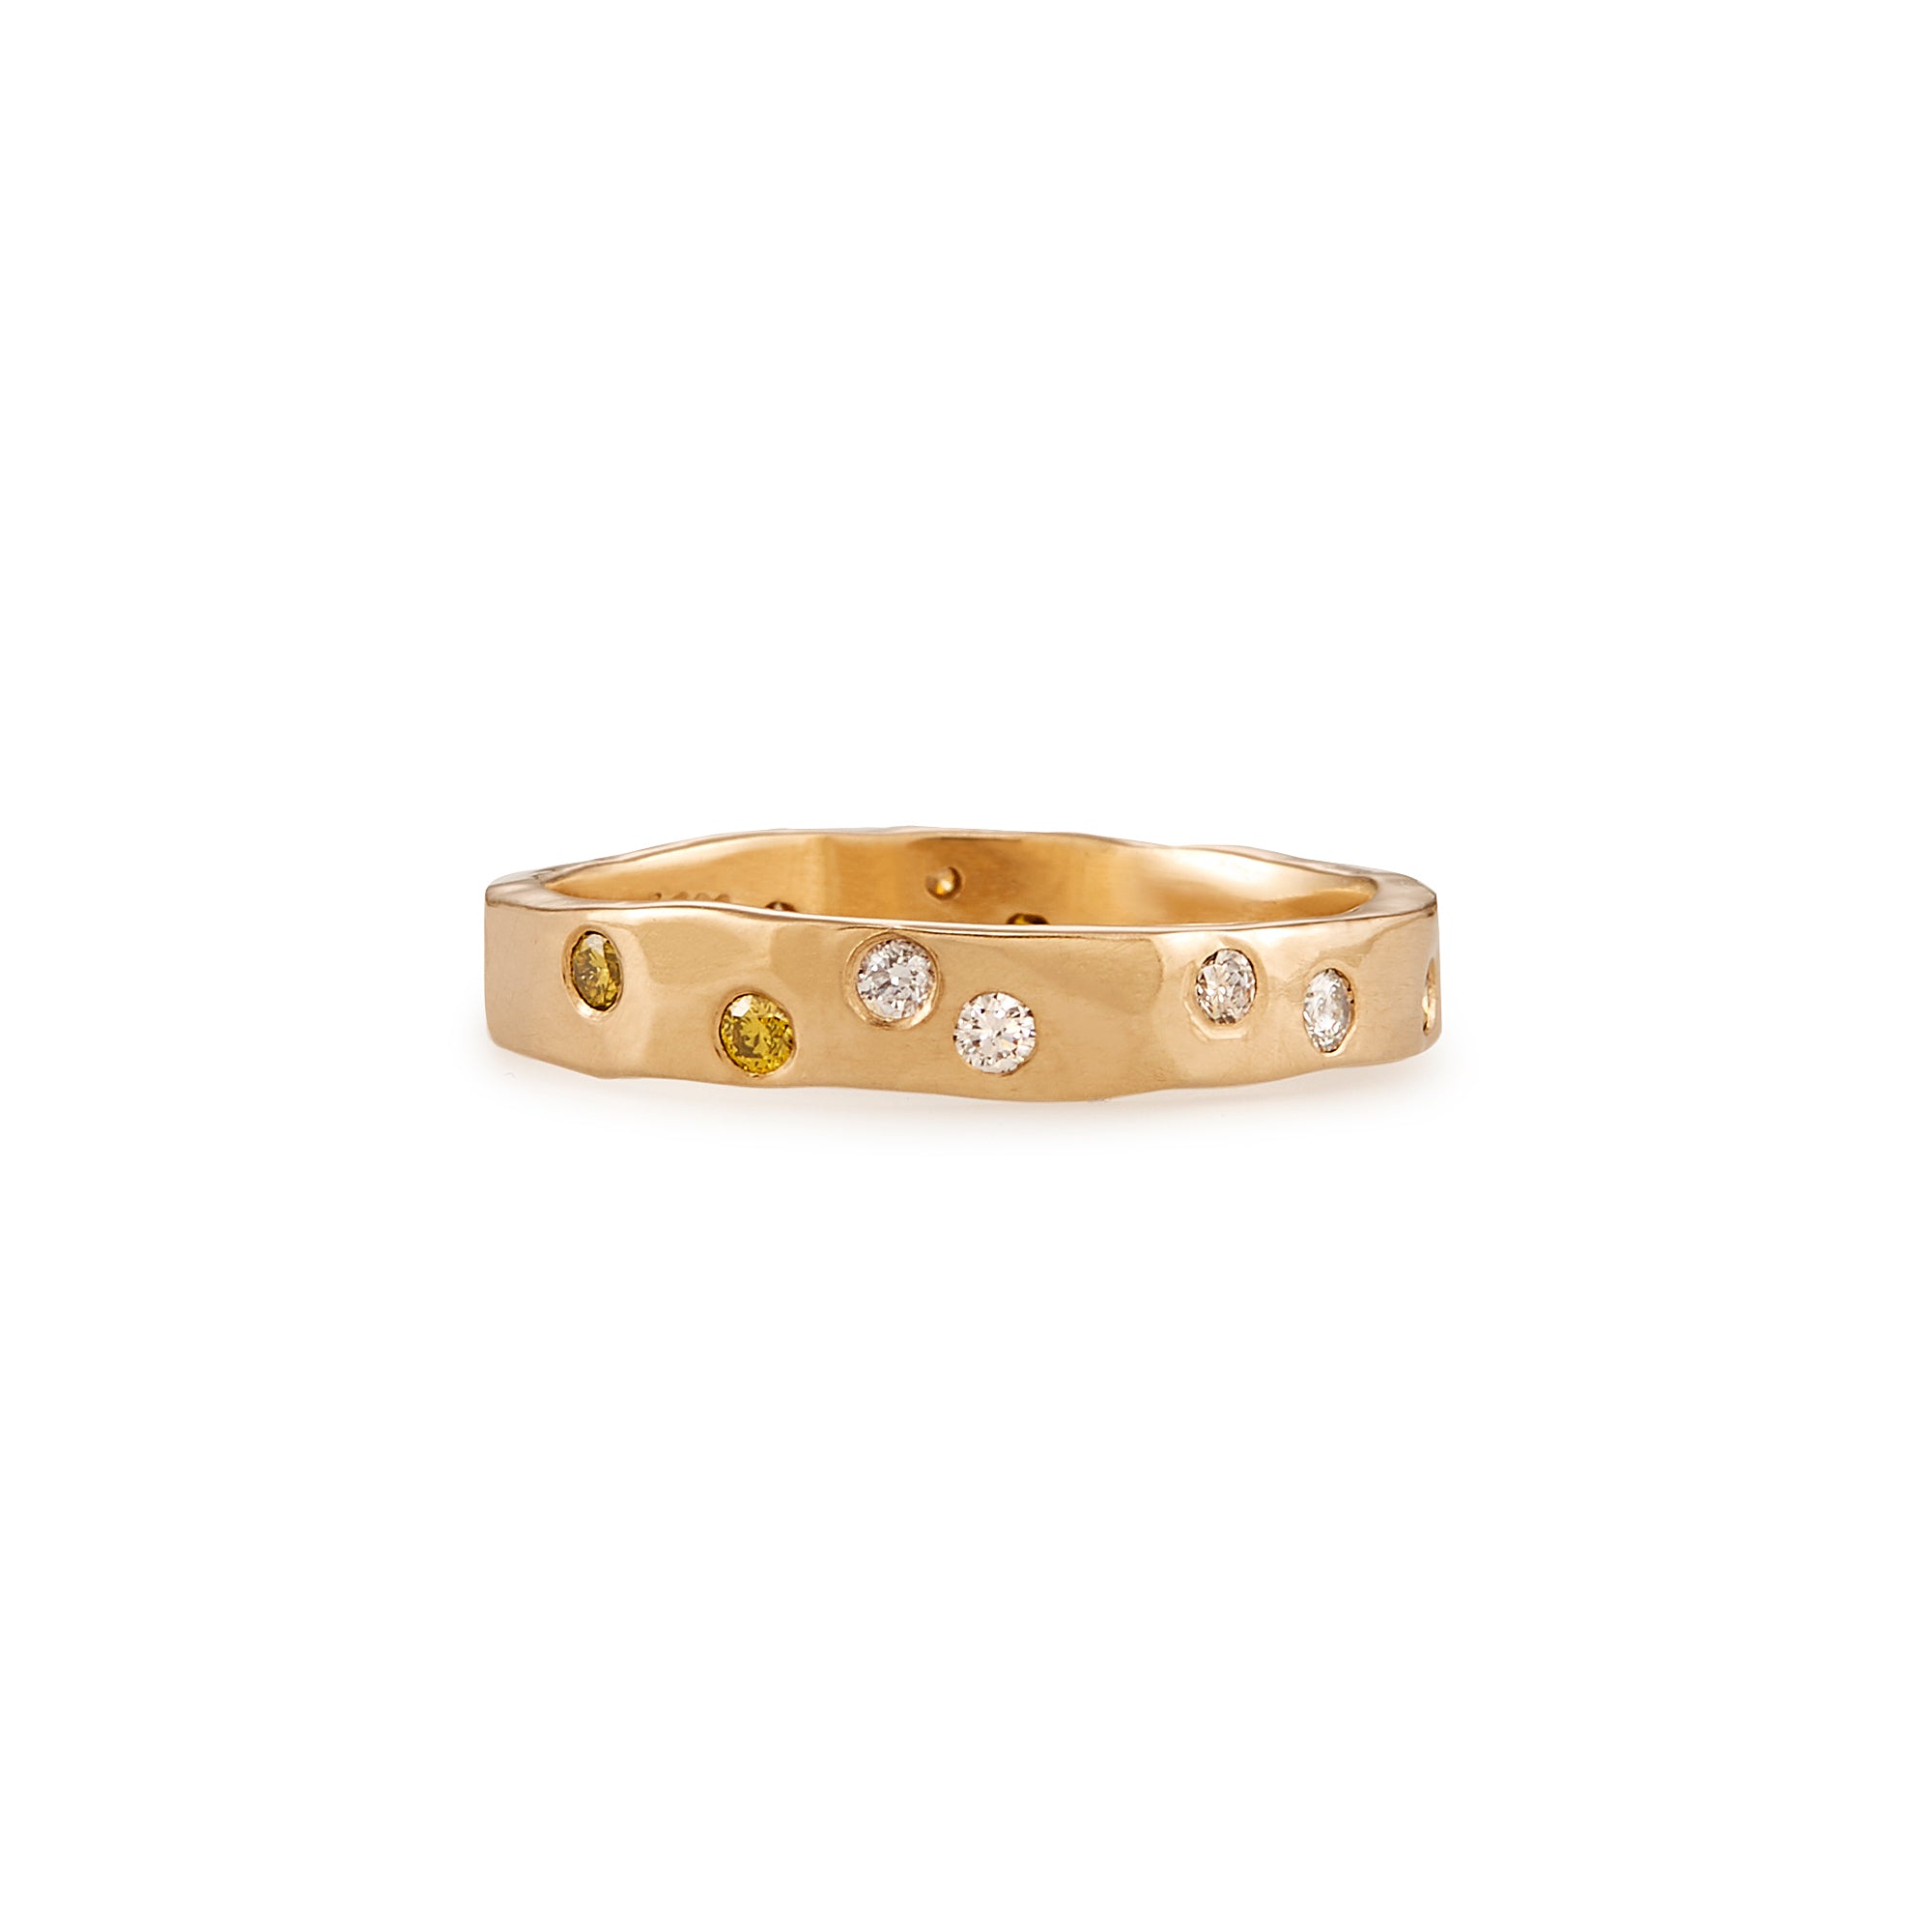 This ONE-OF-A-KIND constellation eternity band features yellow, champagne and white diamonds scattered across the entire ring